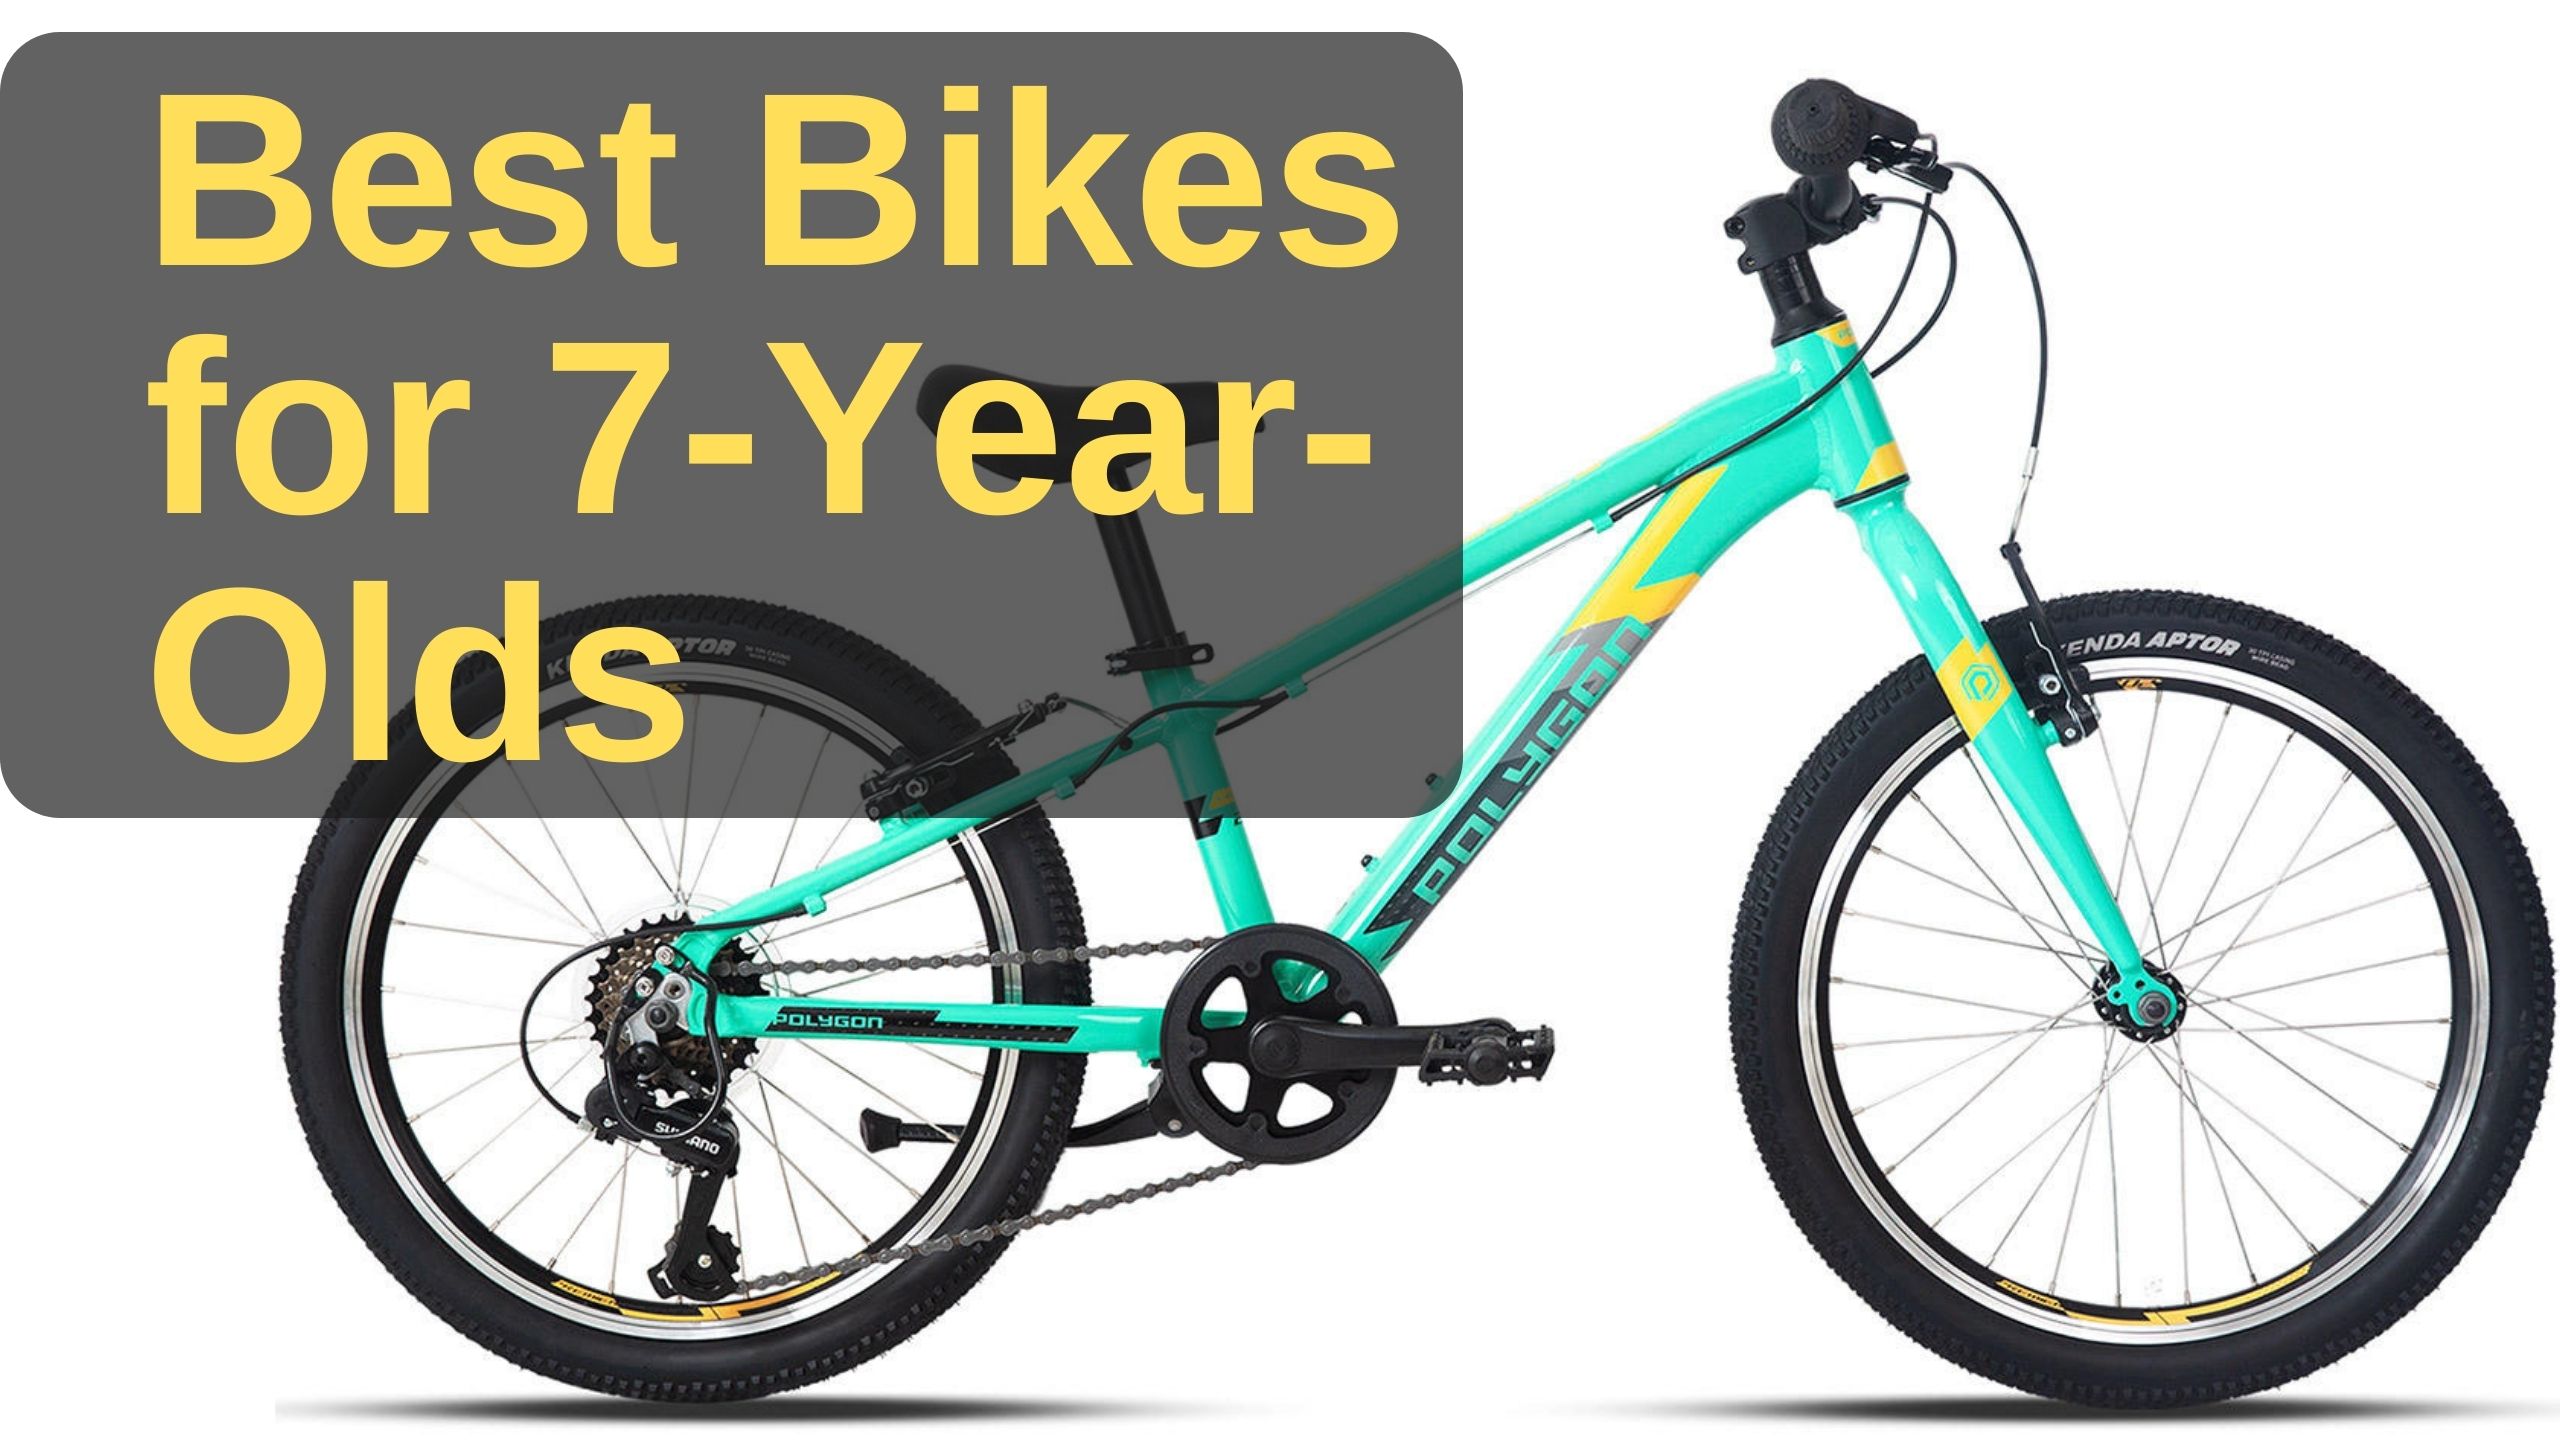 Best Bikes for 7 Year Olds